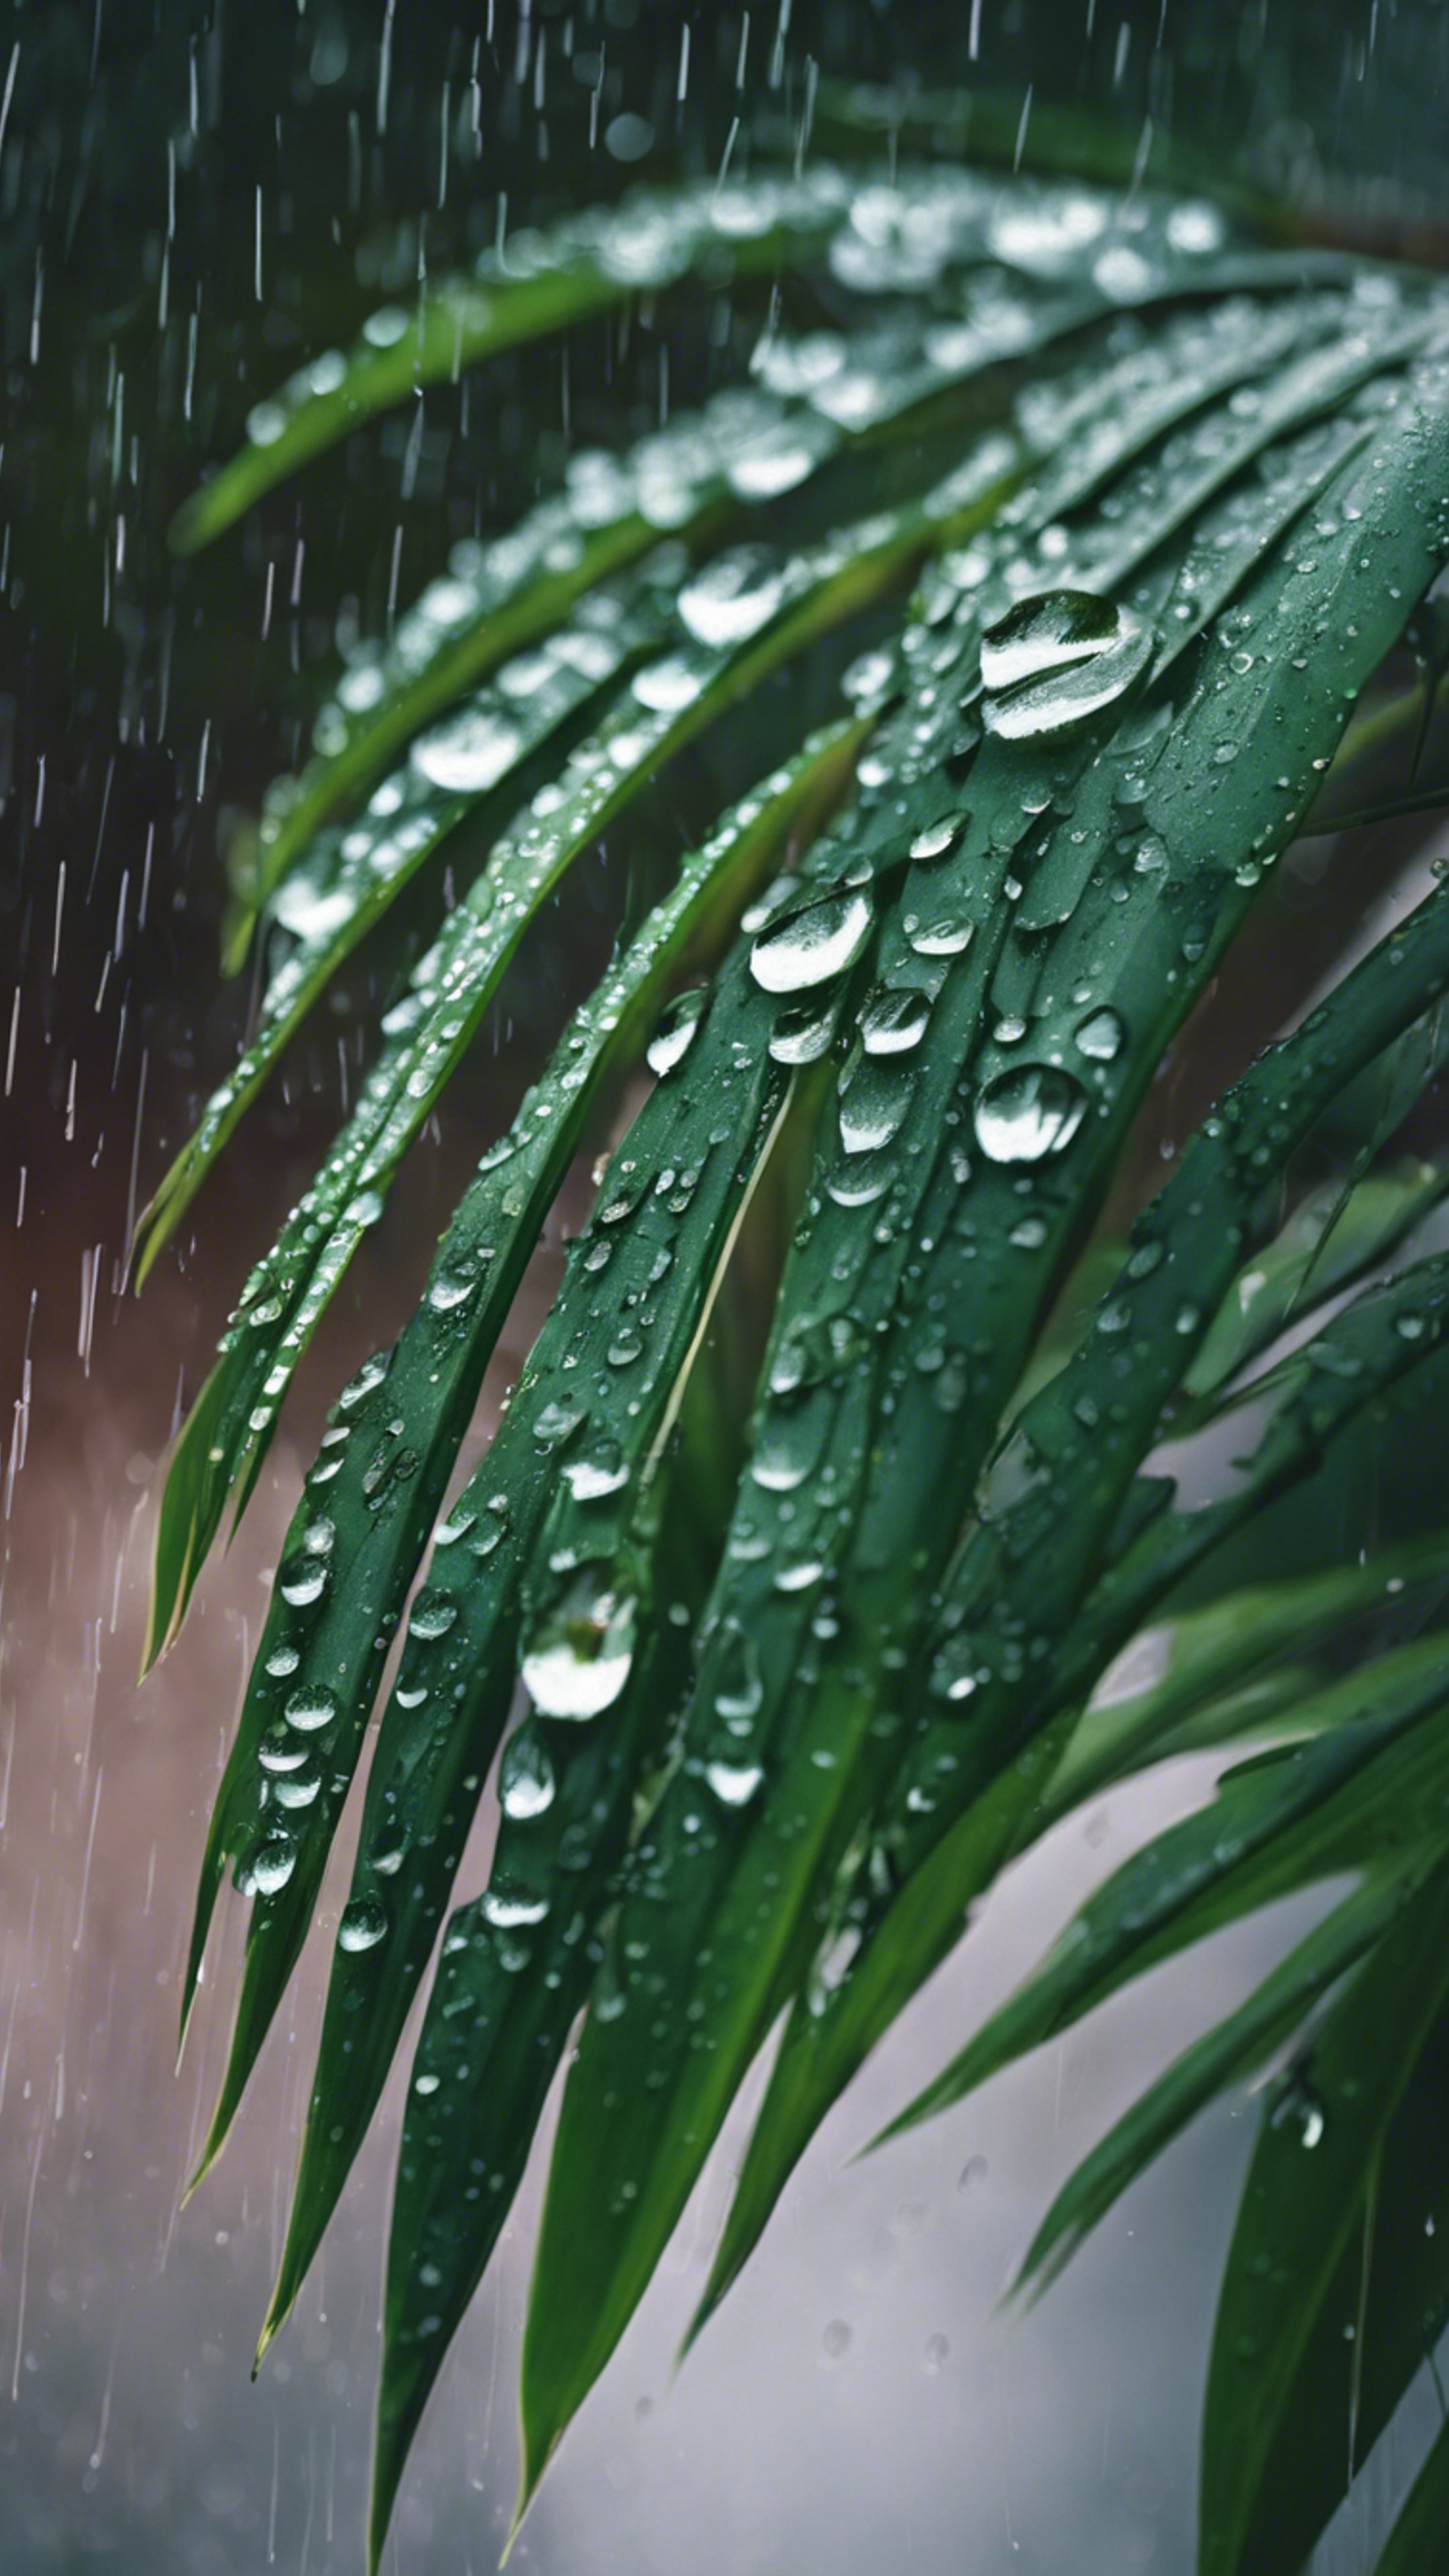 A beautifully presented palm leaf in the rain, droplets falling off its tips.壁紙[ec3663aabee2420b9456]